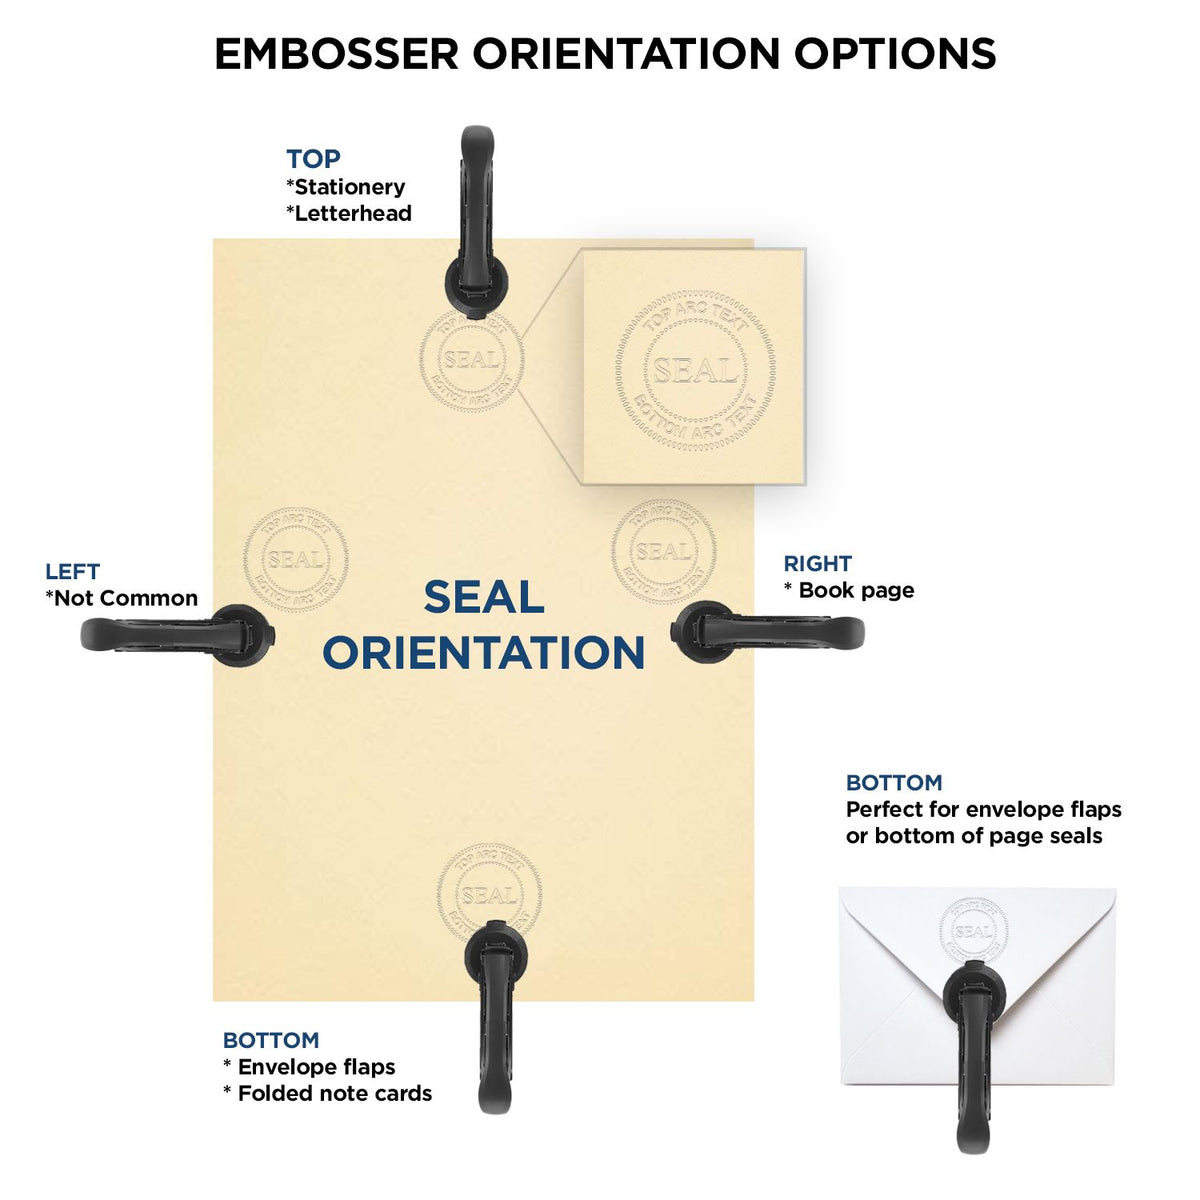 An infographic for the Heavy Duty Cast Iron Rhode Island Architect Embosser showing embosser orientation, this is showing examples of a top, bottom, right and left insert.